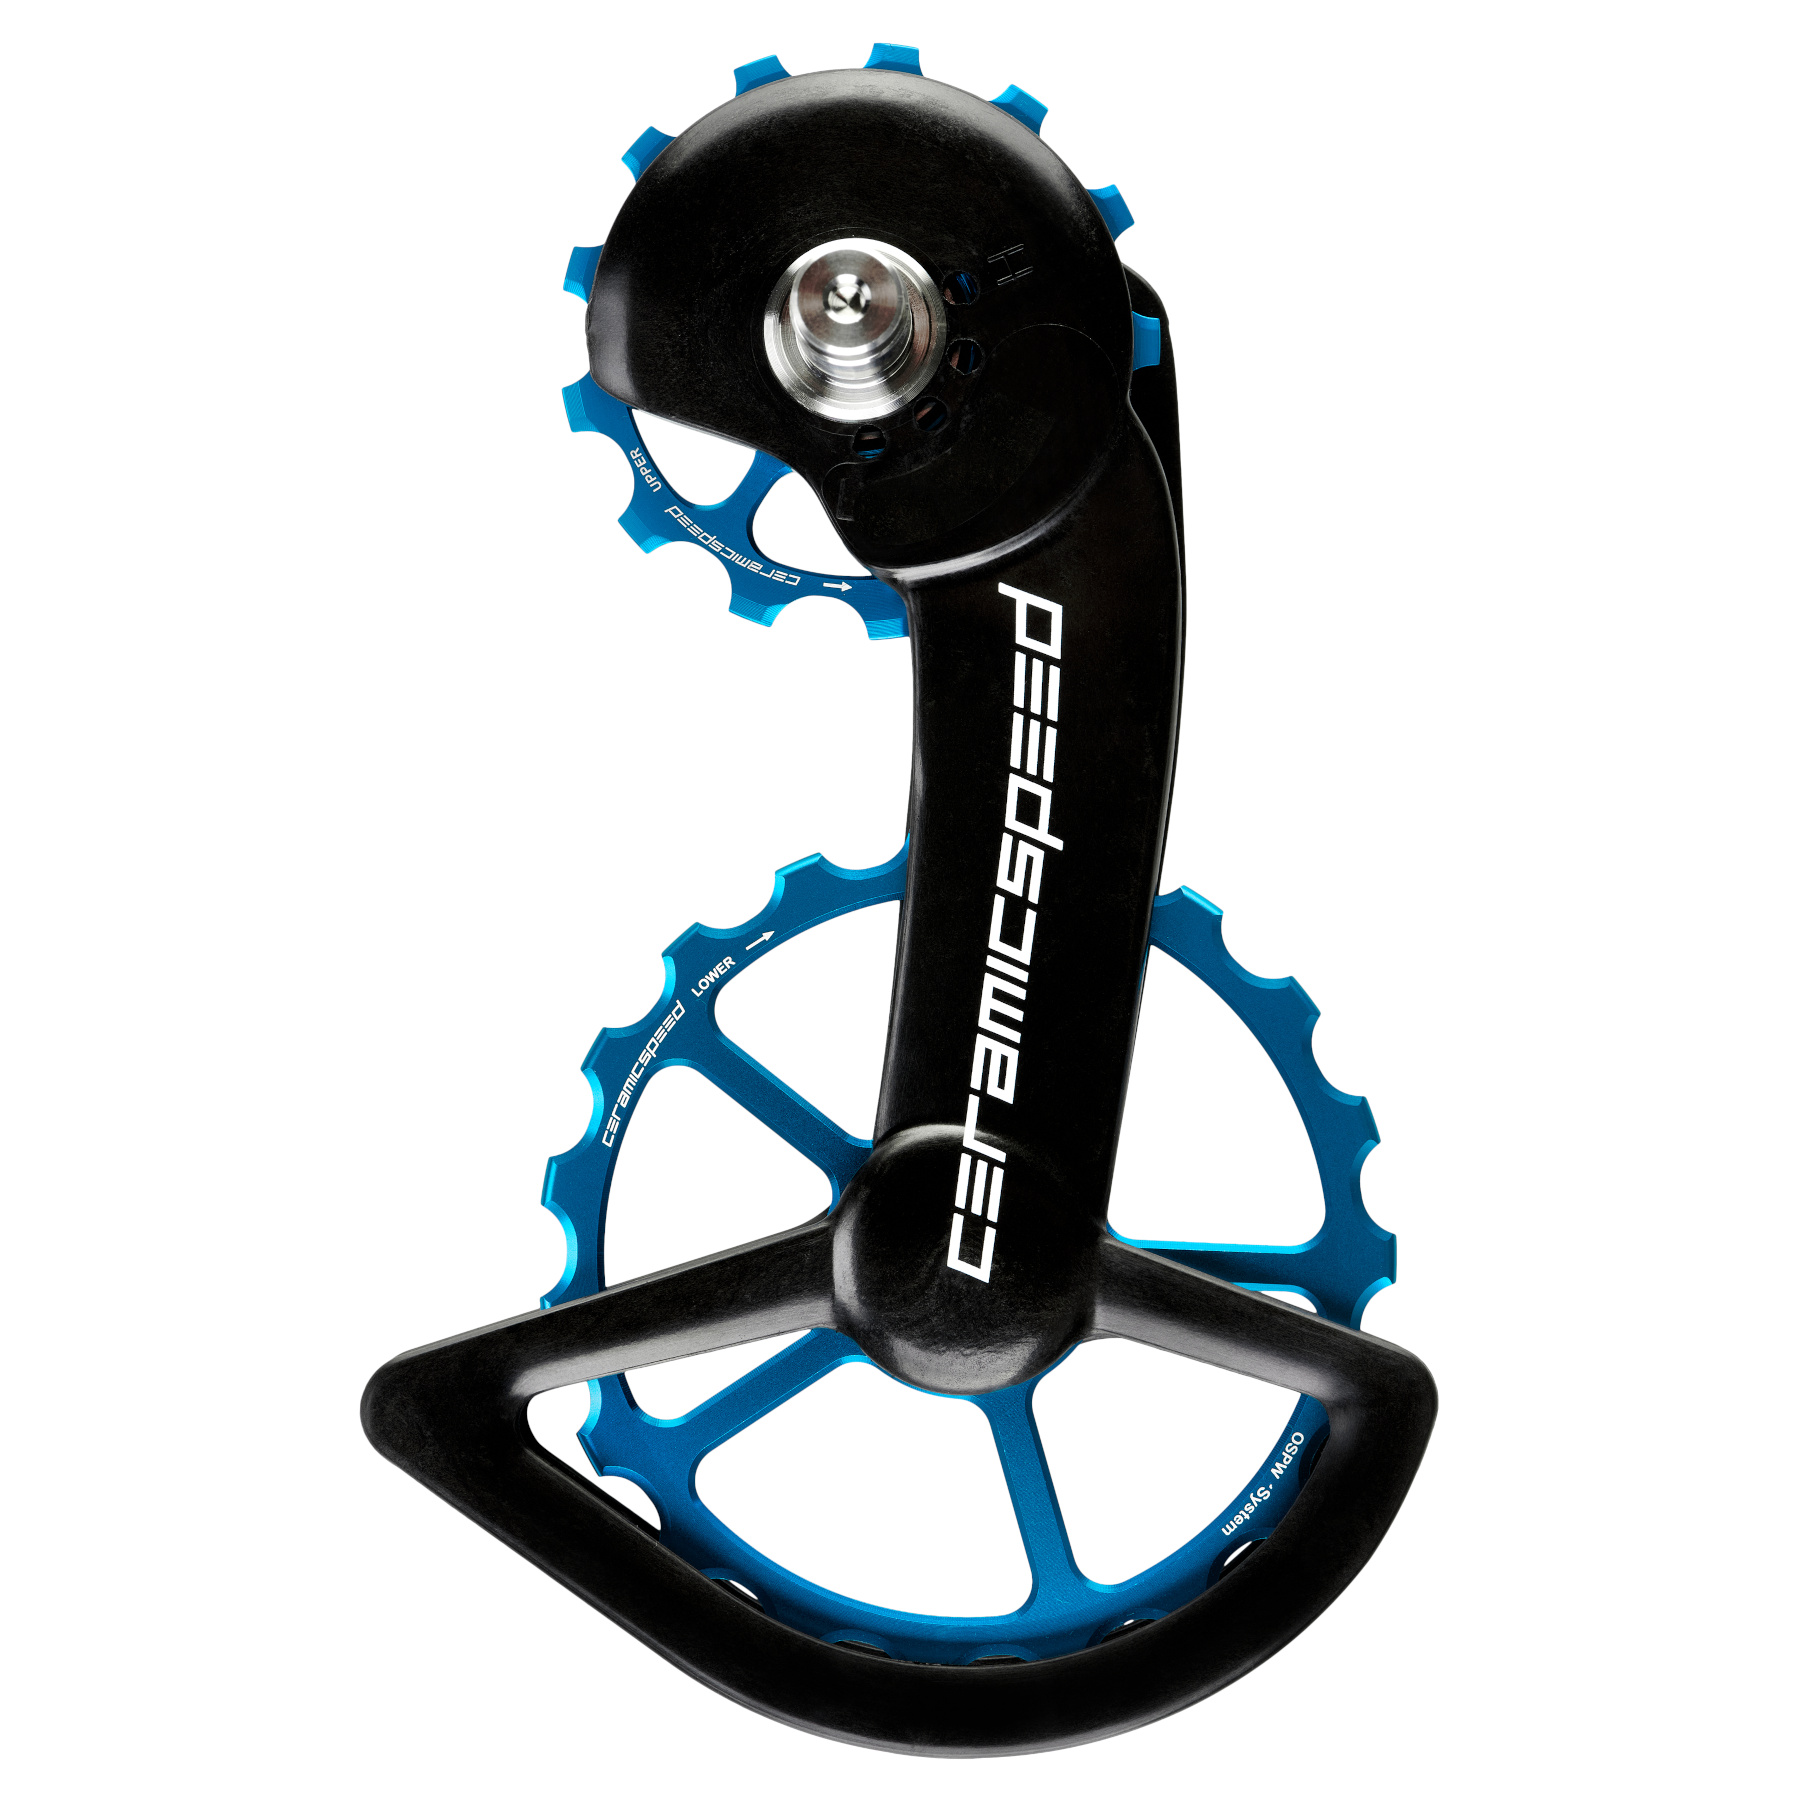 Picture of CeramicSpeed OSPW Derailleur Pulley System - for Shimano R9100/R8000 (11s) | 13/19 Teeth | Coated Bearings - blue